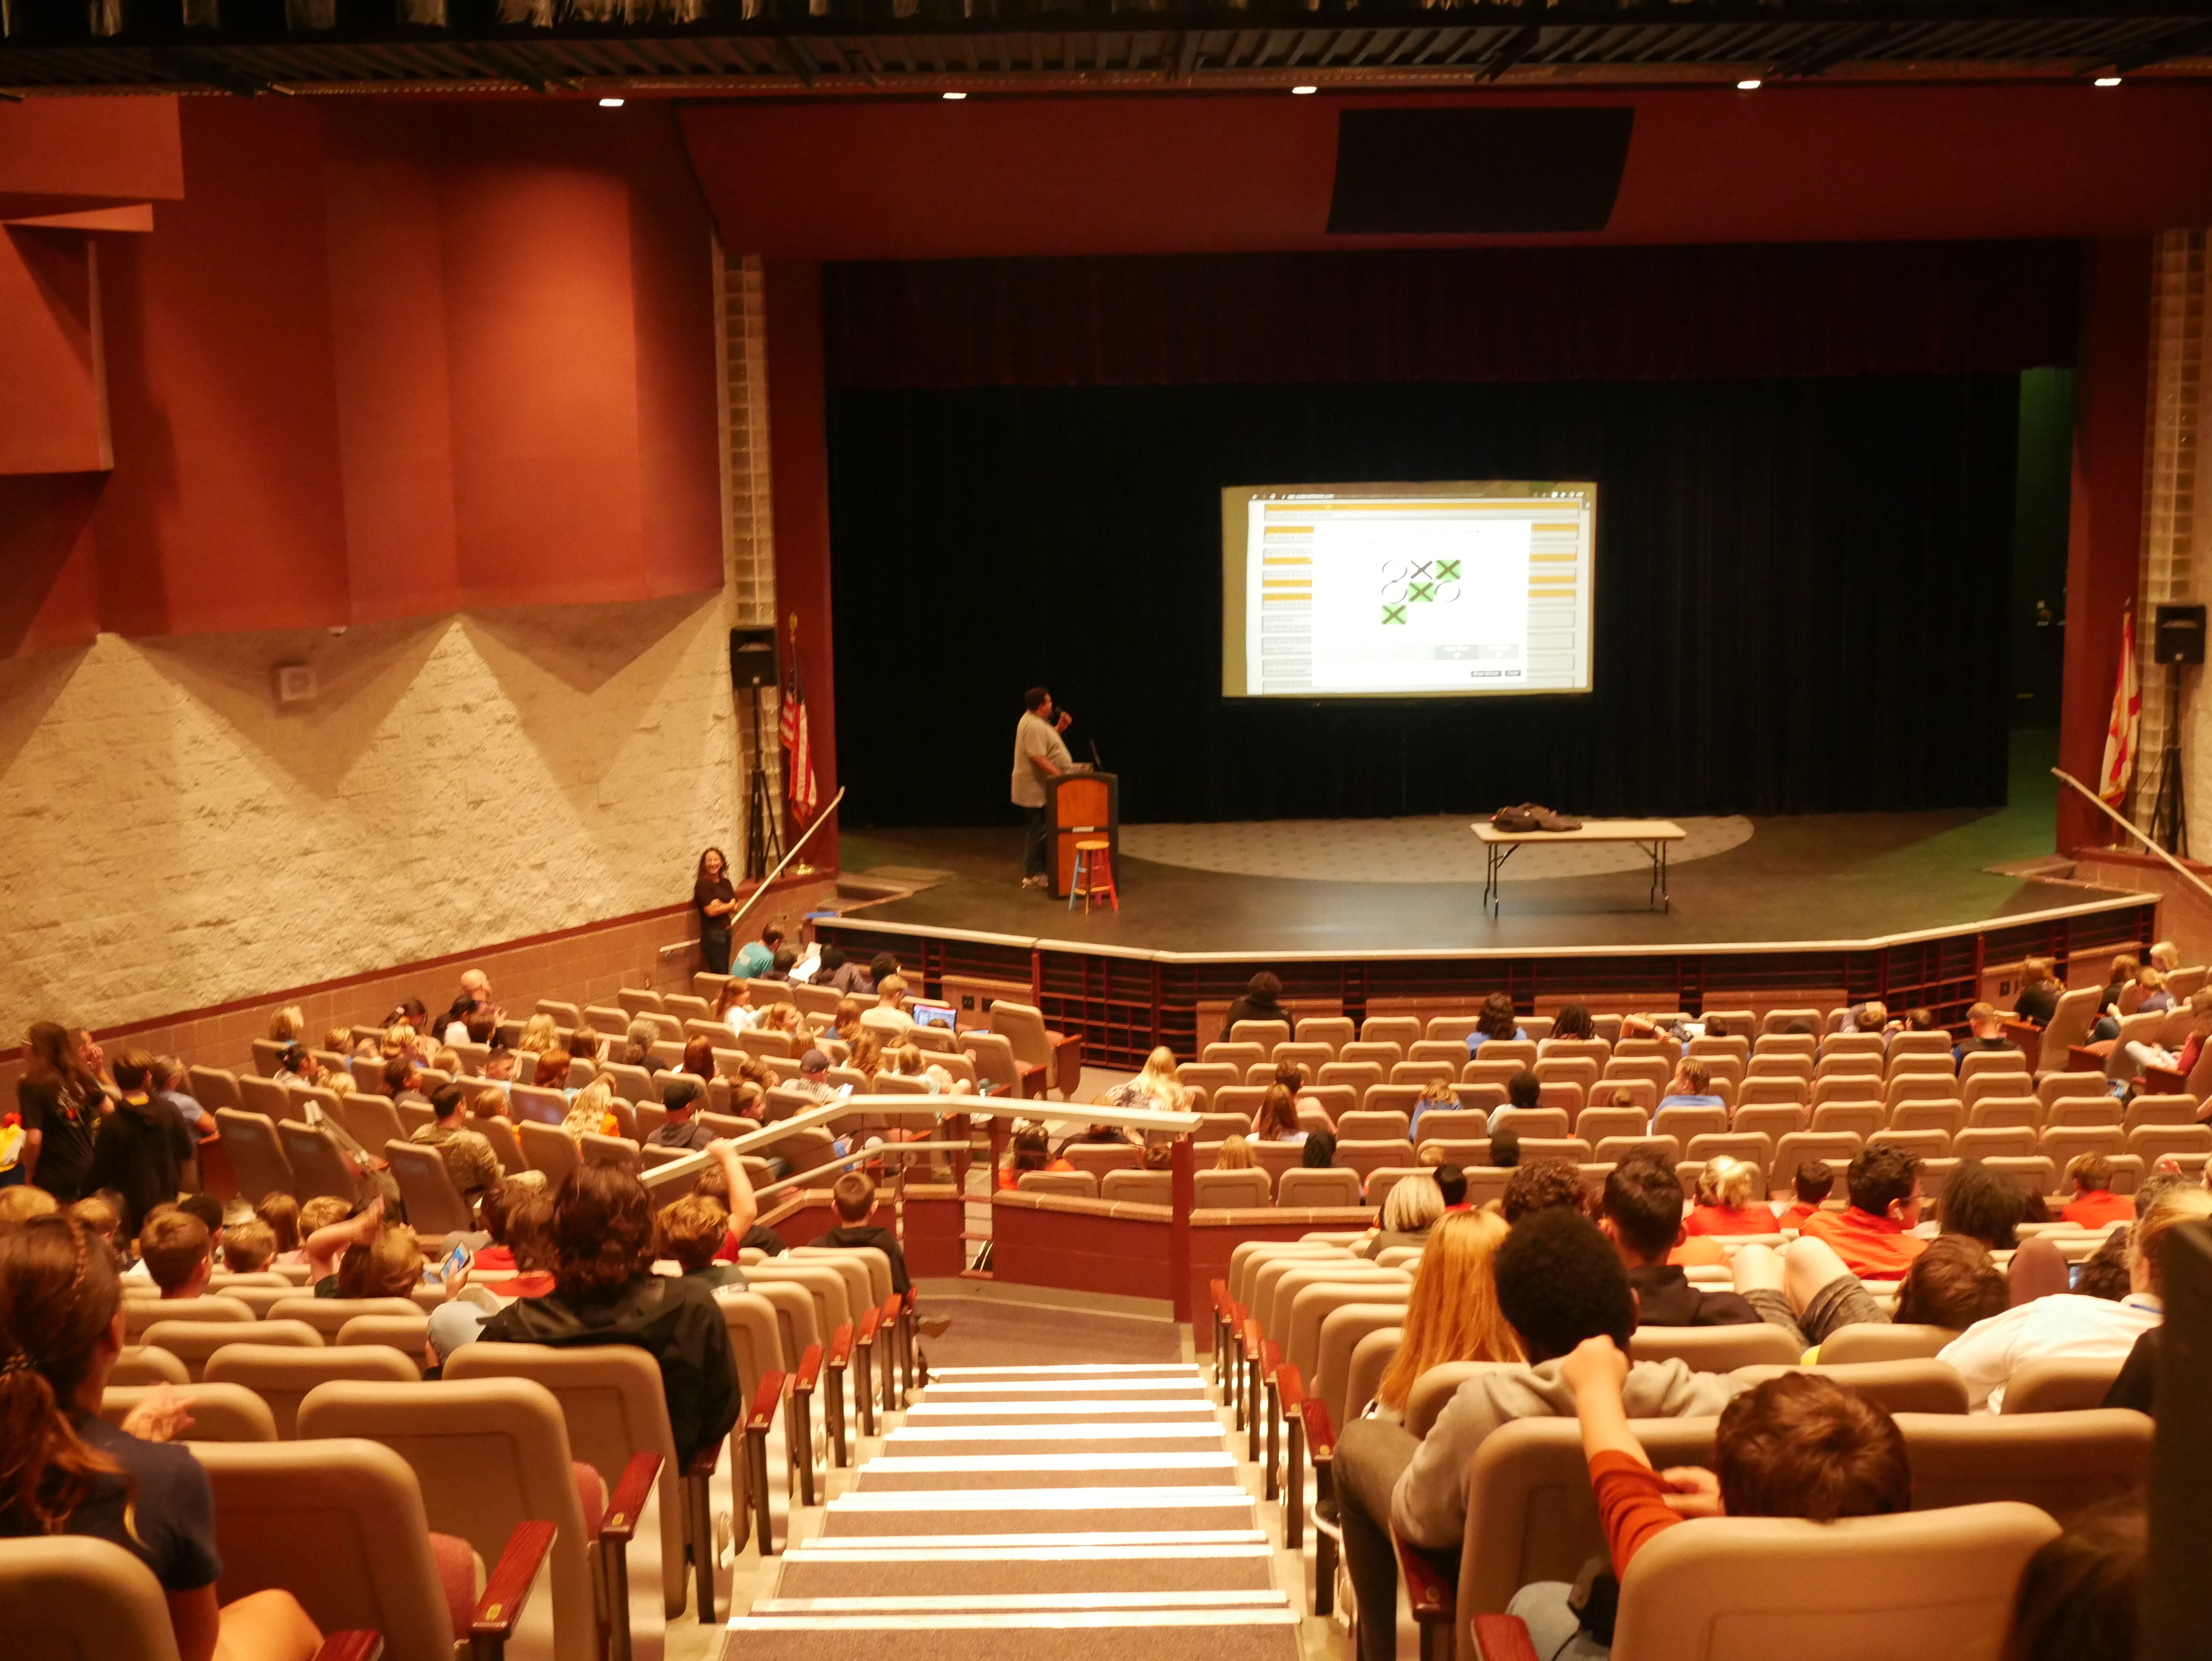 A photo taken from a distance of a man standing in front of a podium onstage in an auditorium, speaking into a microphone and facing a projector screen. Students and teachers are seated in the audience, watching the presenter. The projector screen shows a completed game of tic-tac-toe.